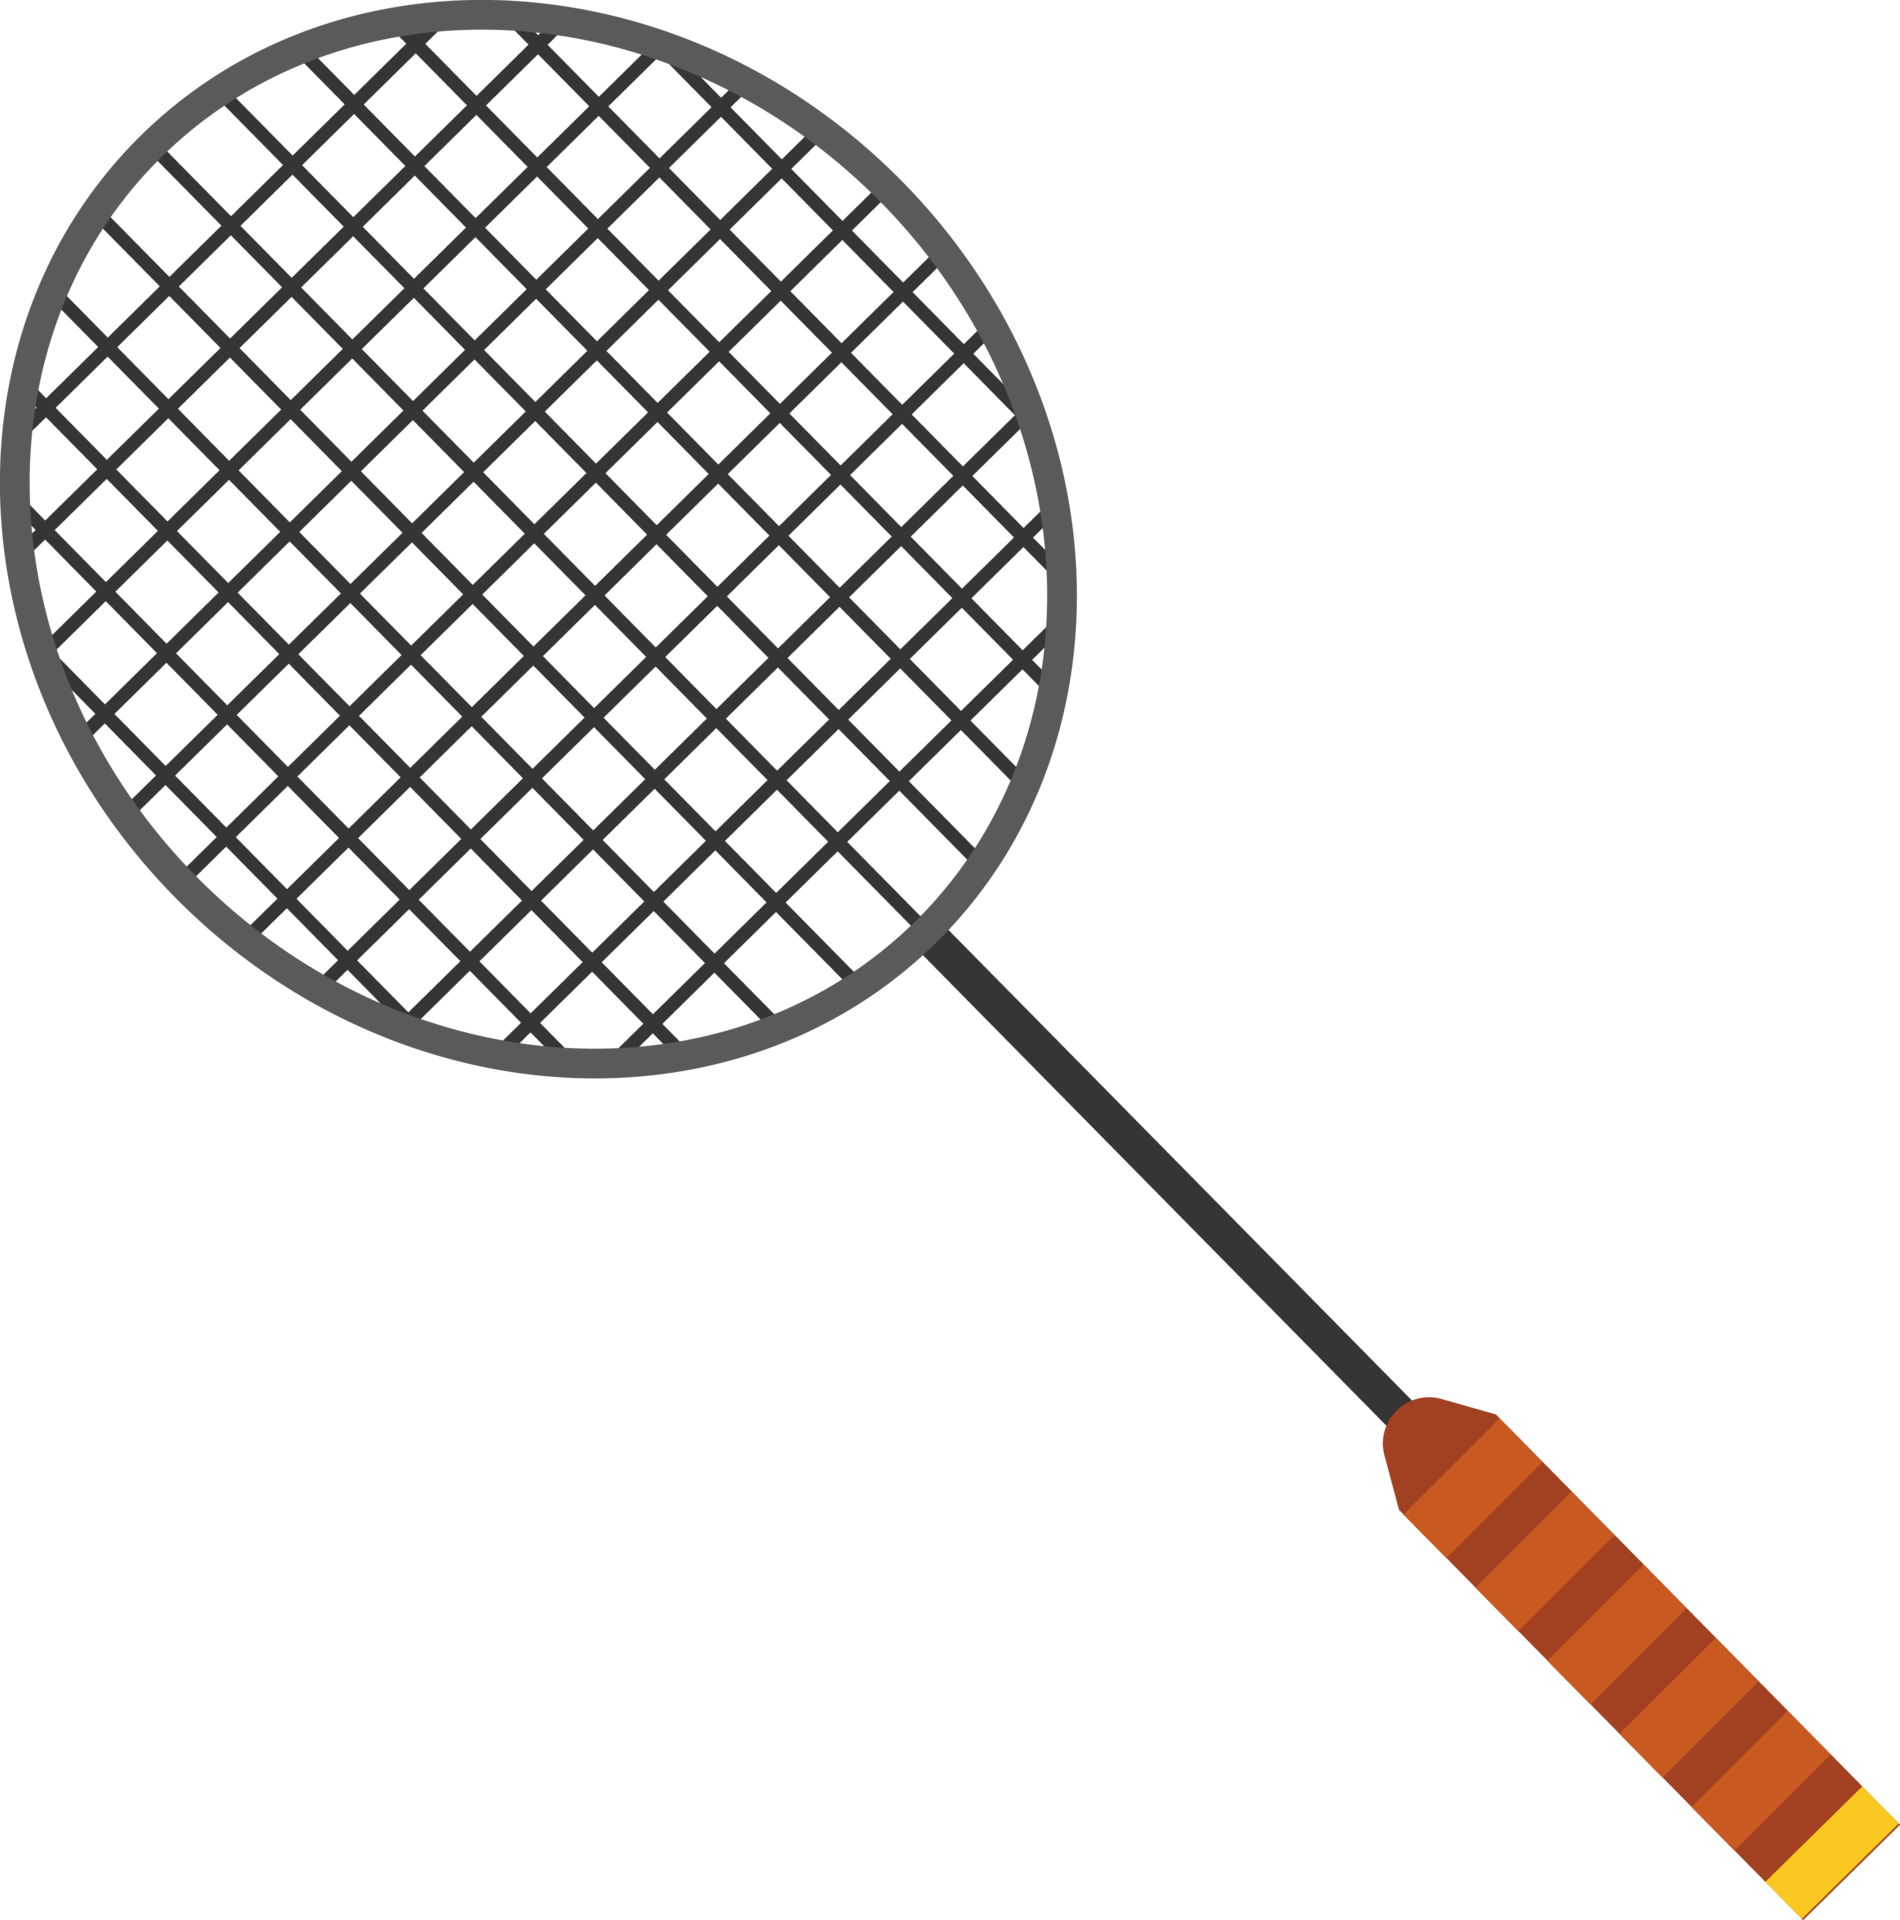 Badminton Racket And Cut Files For Clip Art (eps, Svg,